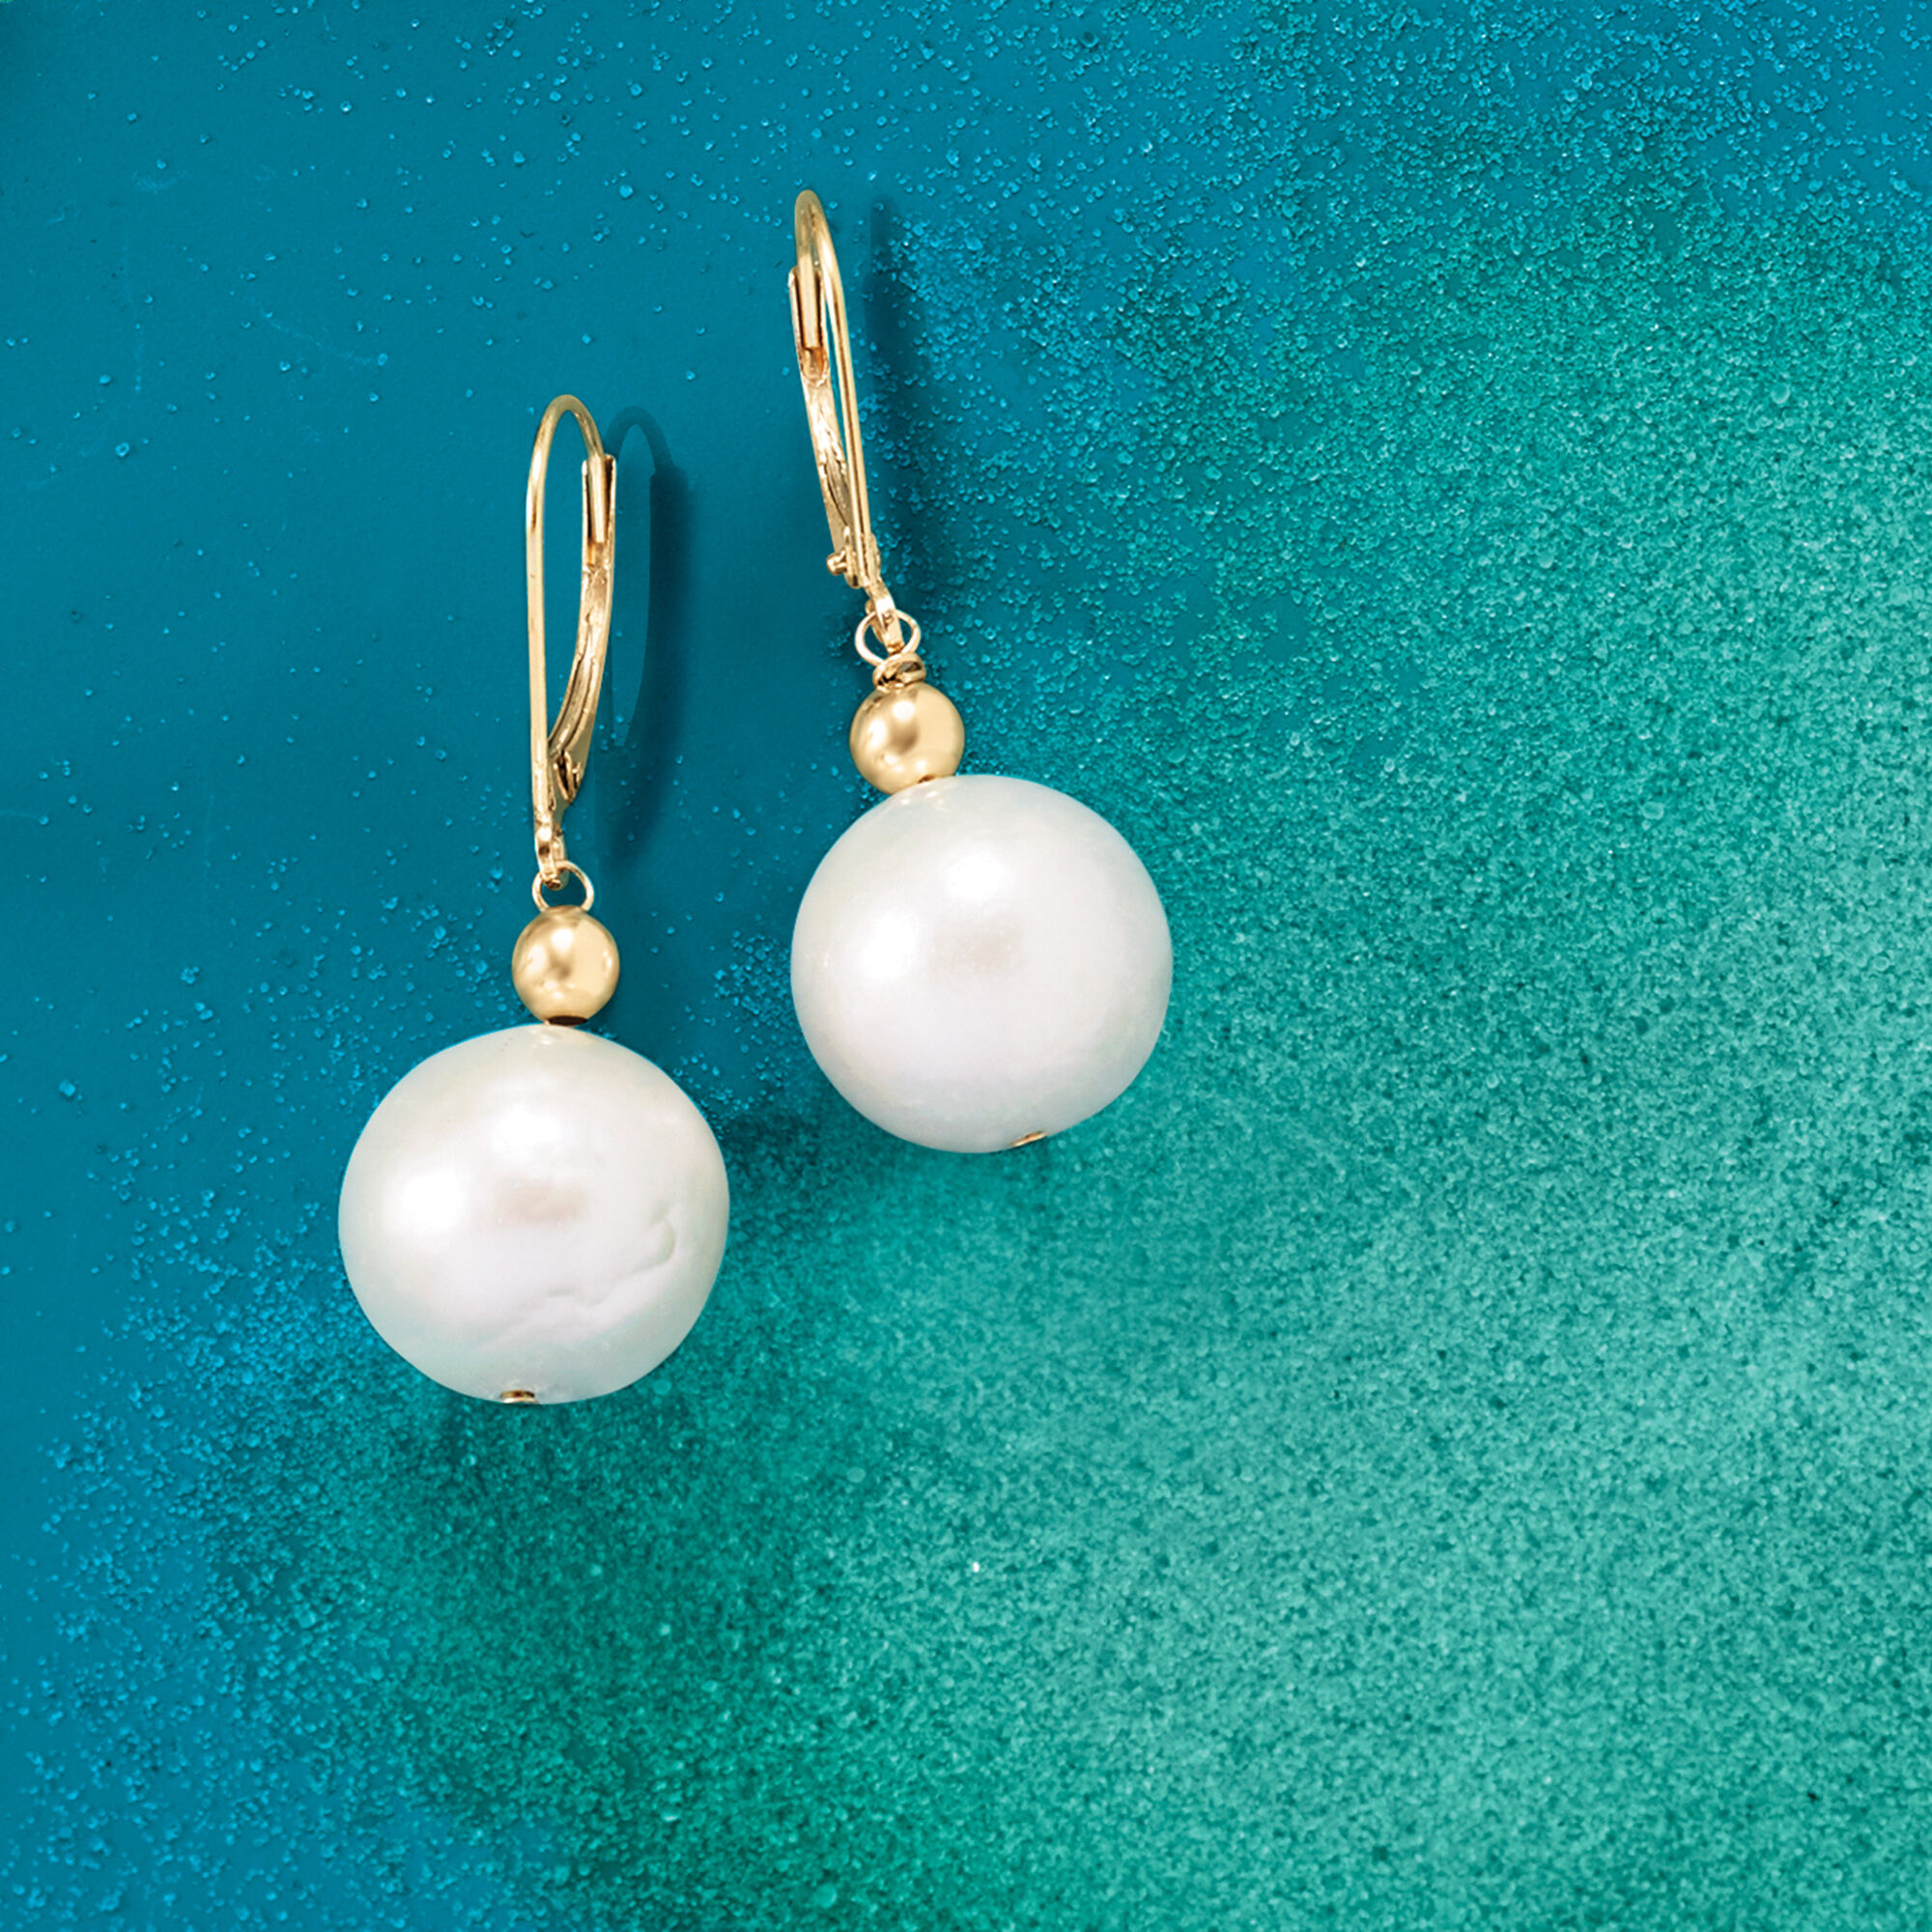 13-14mm Cultured Pearl Drop Earrings in 14kt Yellow Gold | Ross-Simons